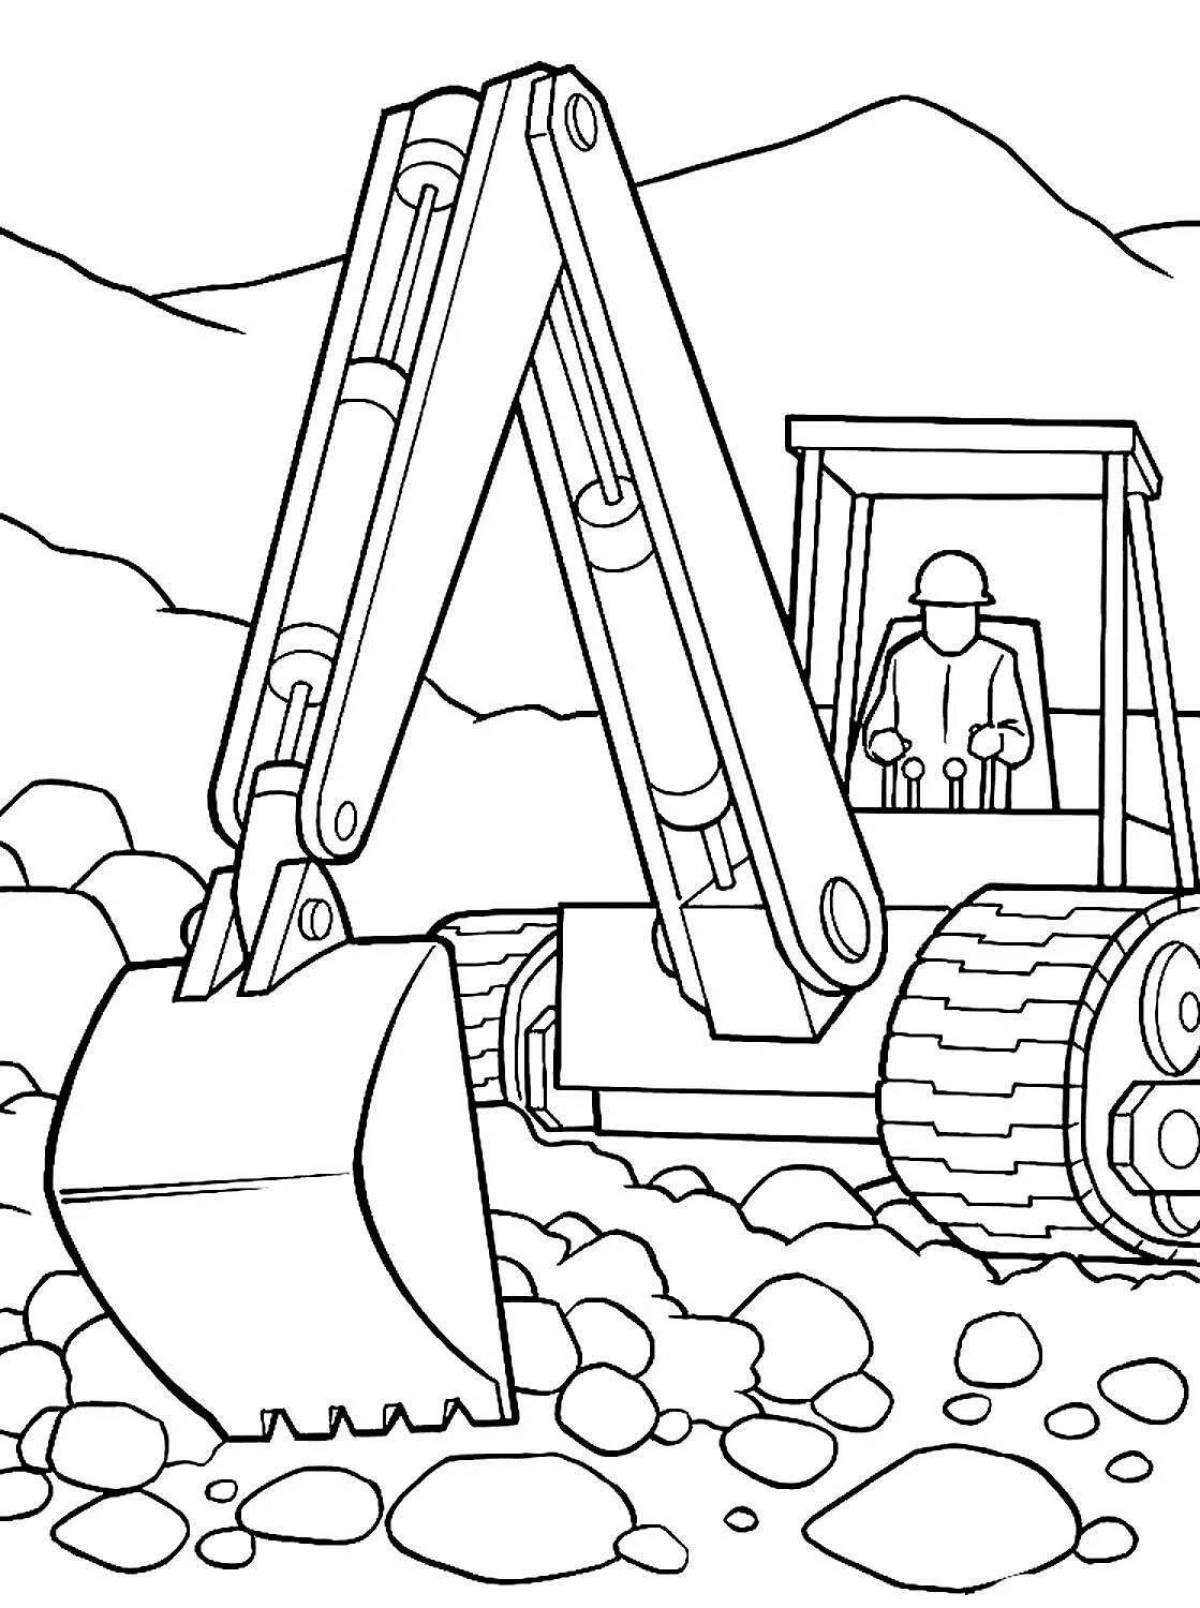 Amazing building coloring pages for boys